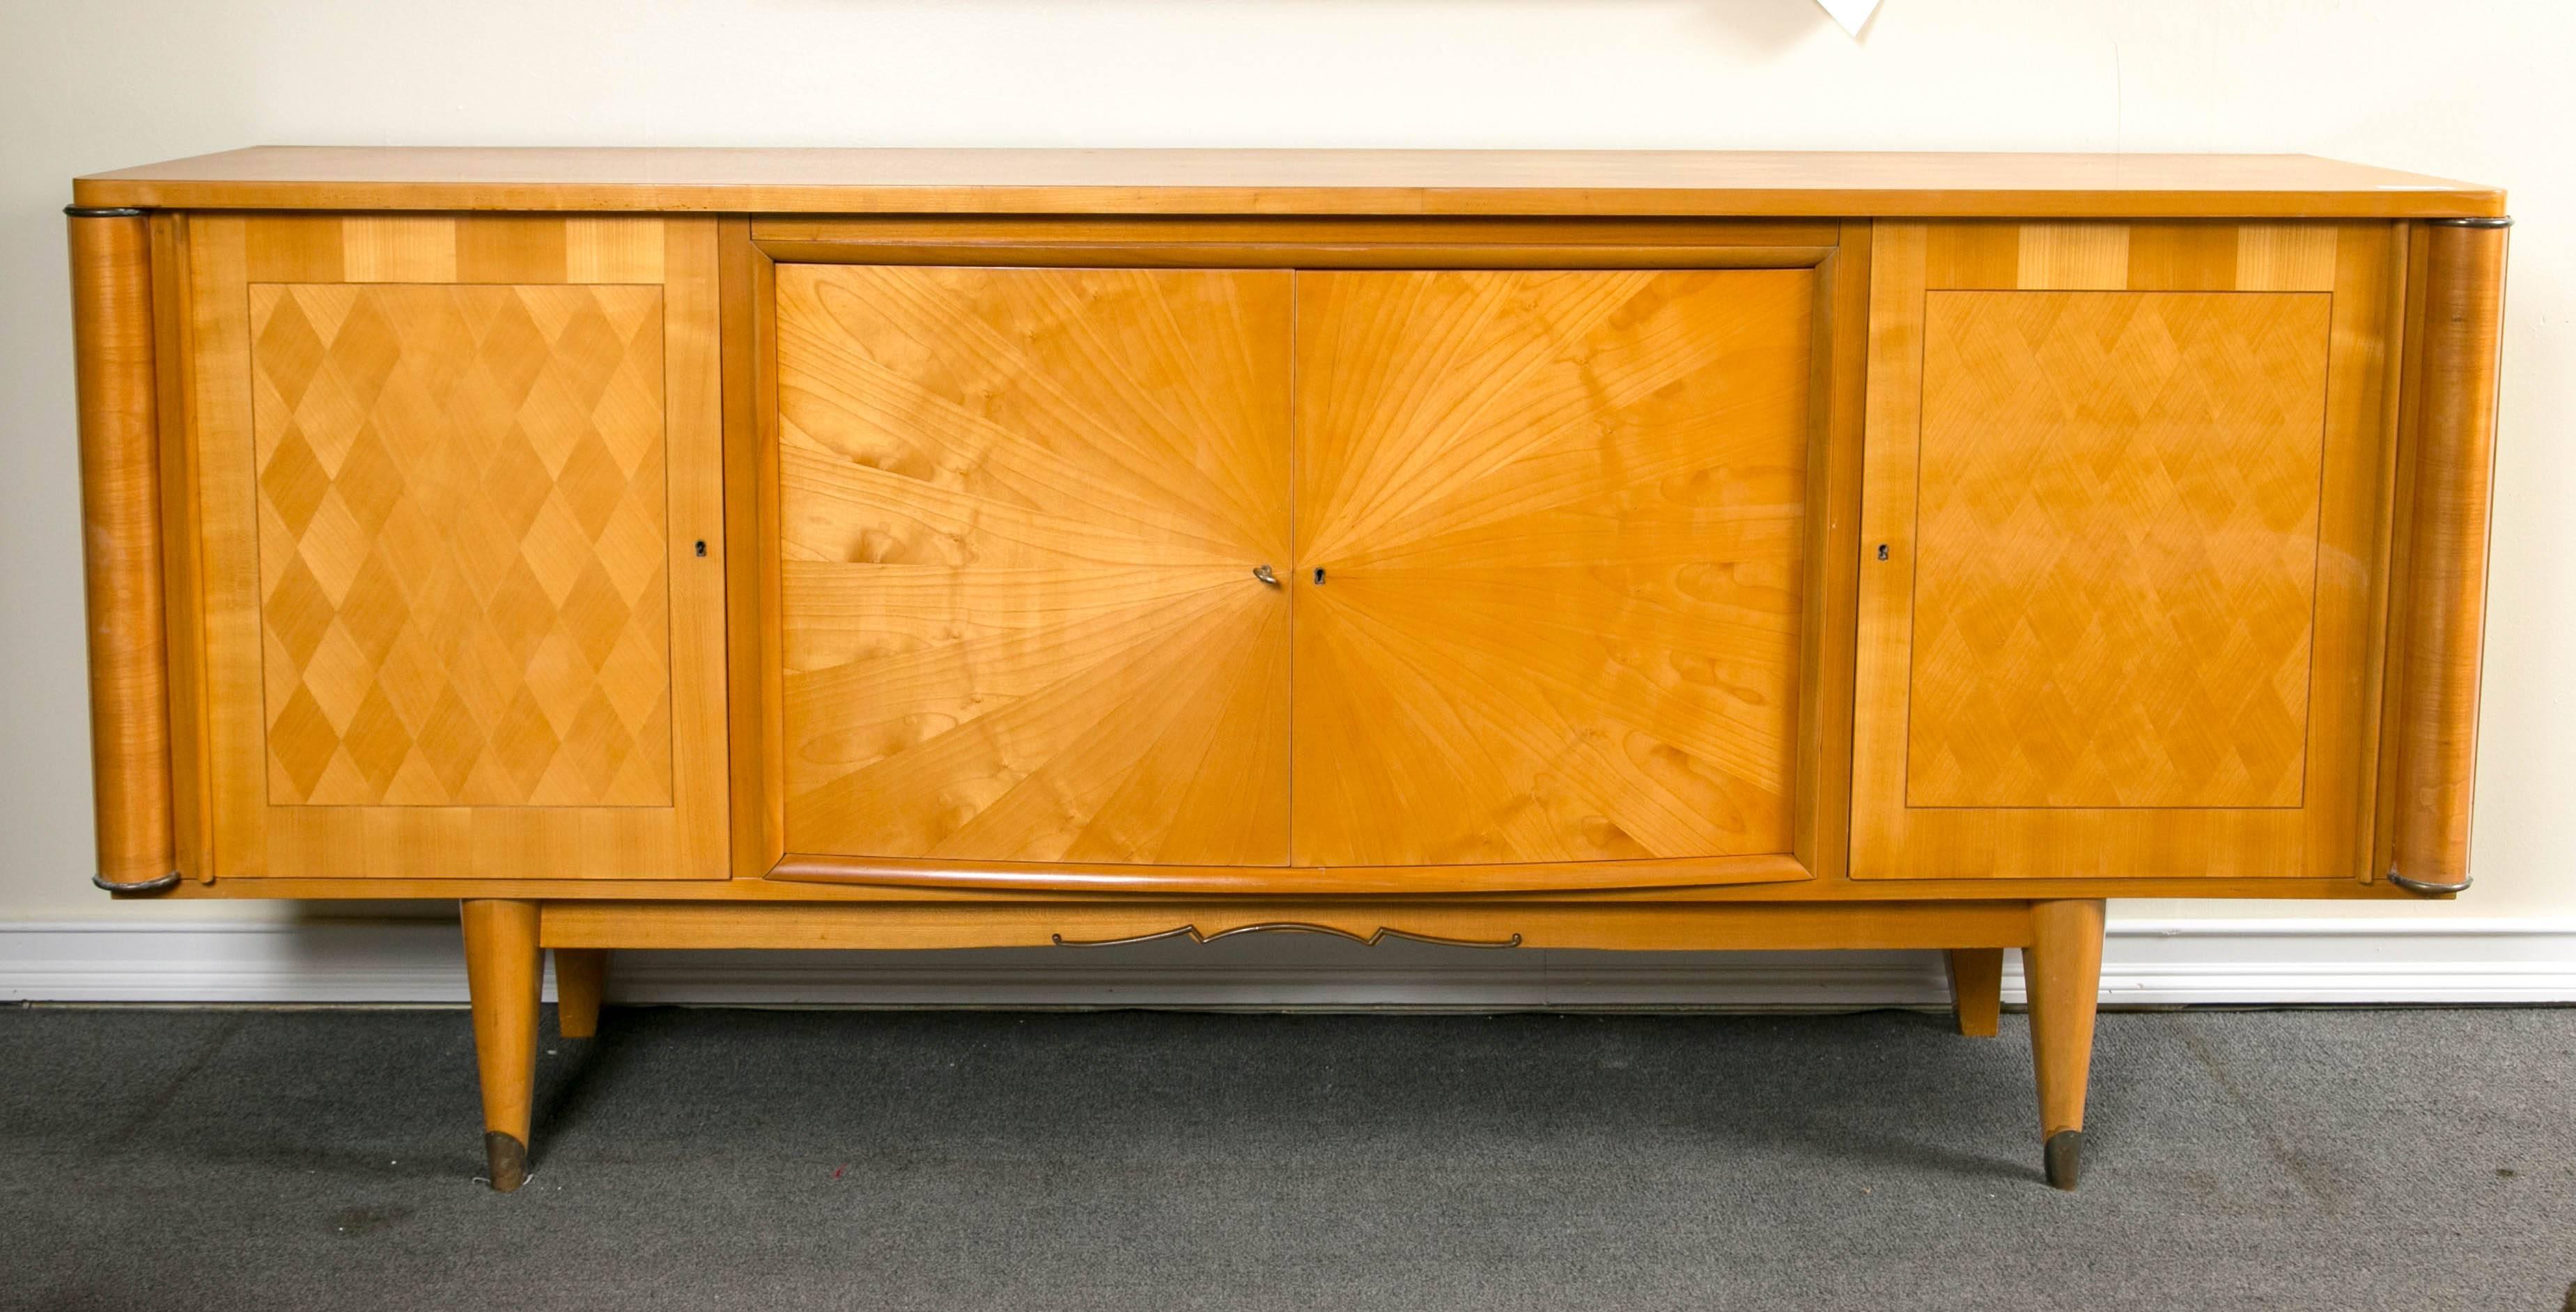 French palatial blonde mahogany sunburst inlaid sideboard. A blonde mahogany French four-door sideboard having starburst form grain on the center doors flanked by diamond form grain doors, circa 1950s. This extraordinary sideboard is exquisite in